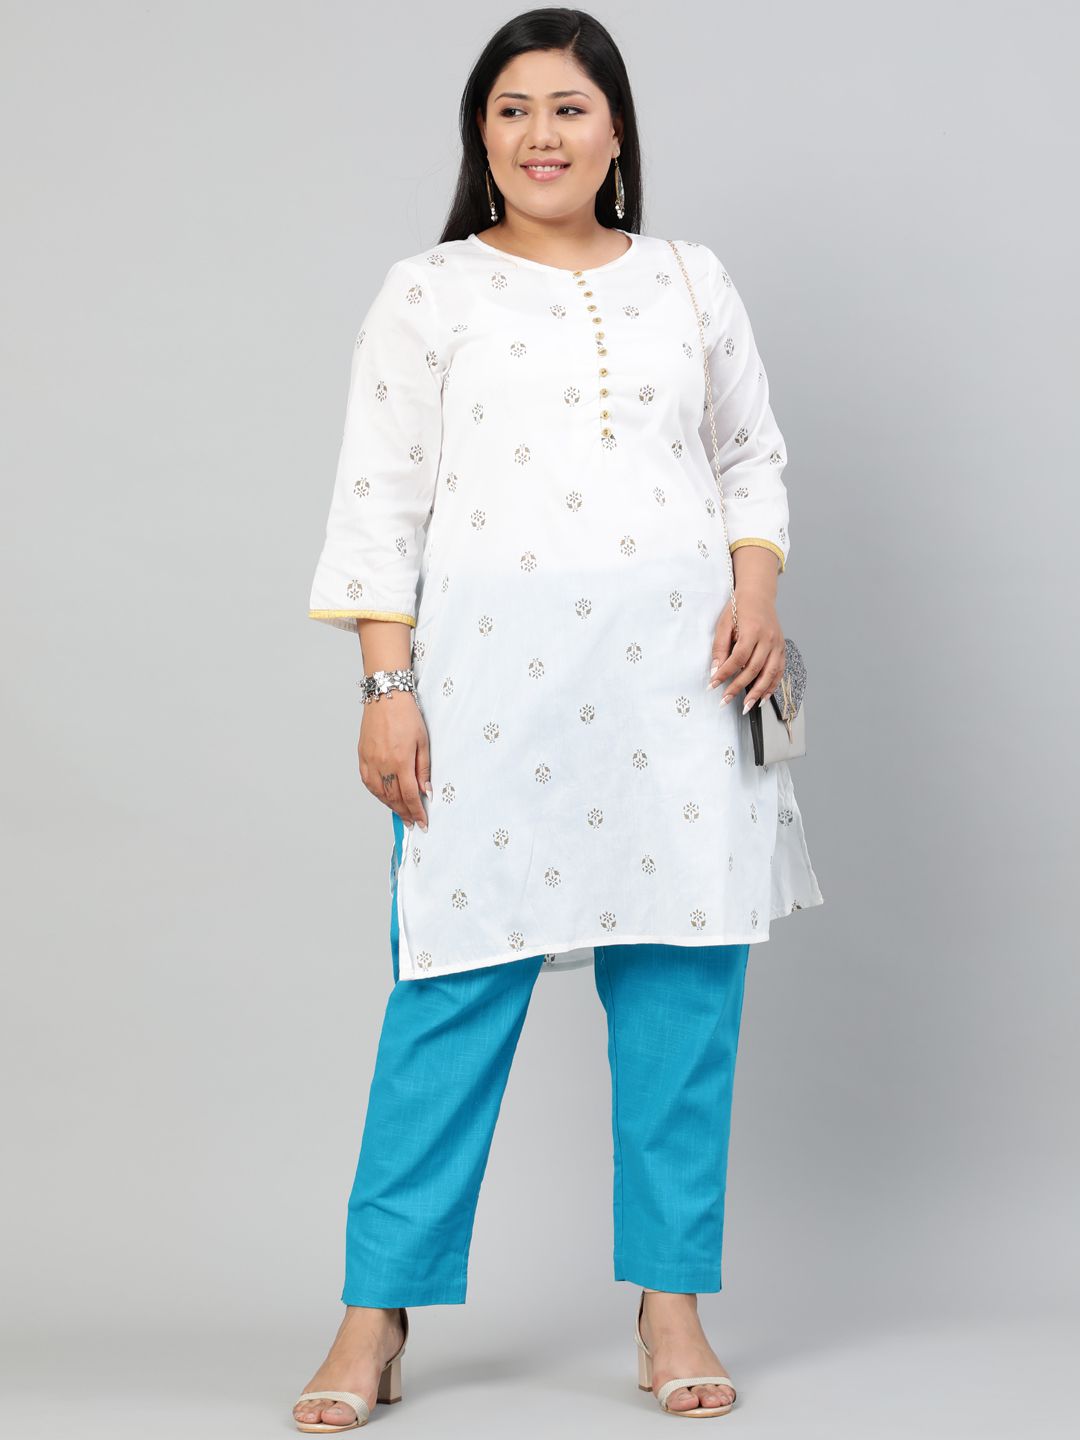 Get ankle length straight pants for kurtis